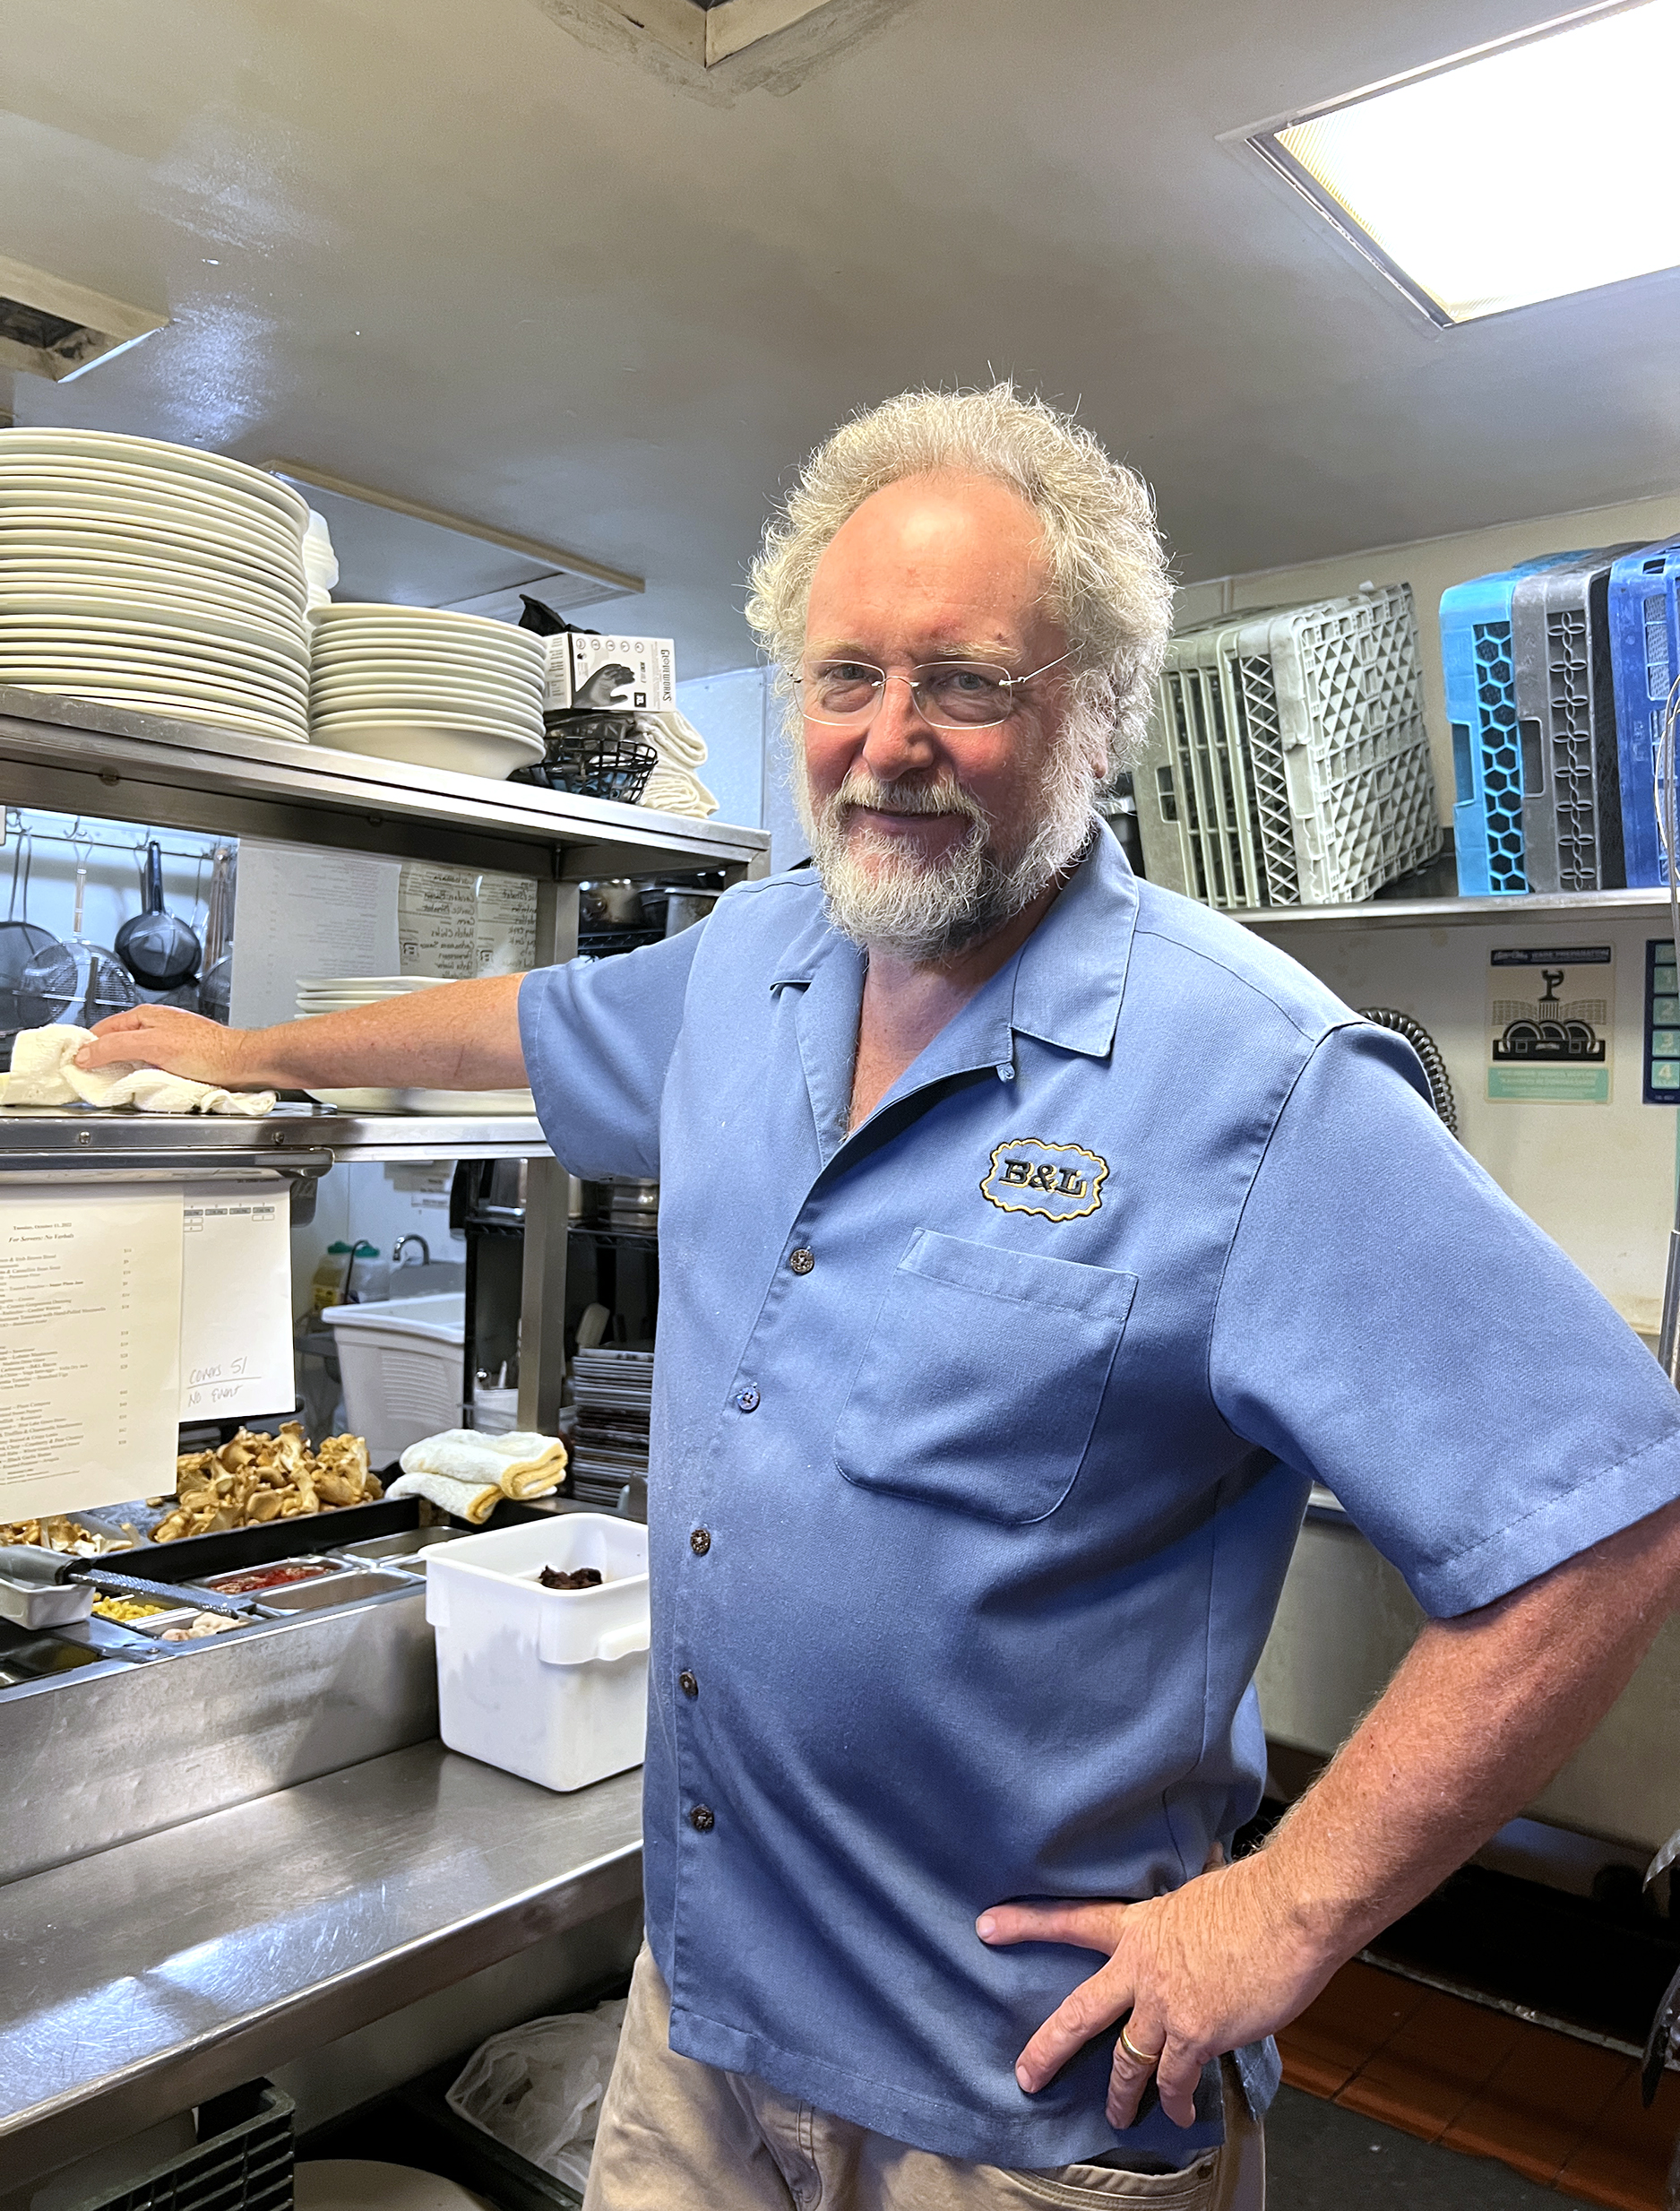 Man in blue shirt stands in a kitchen